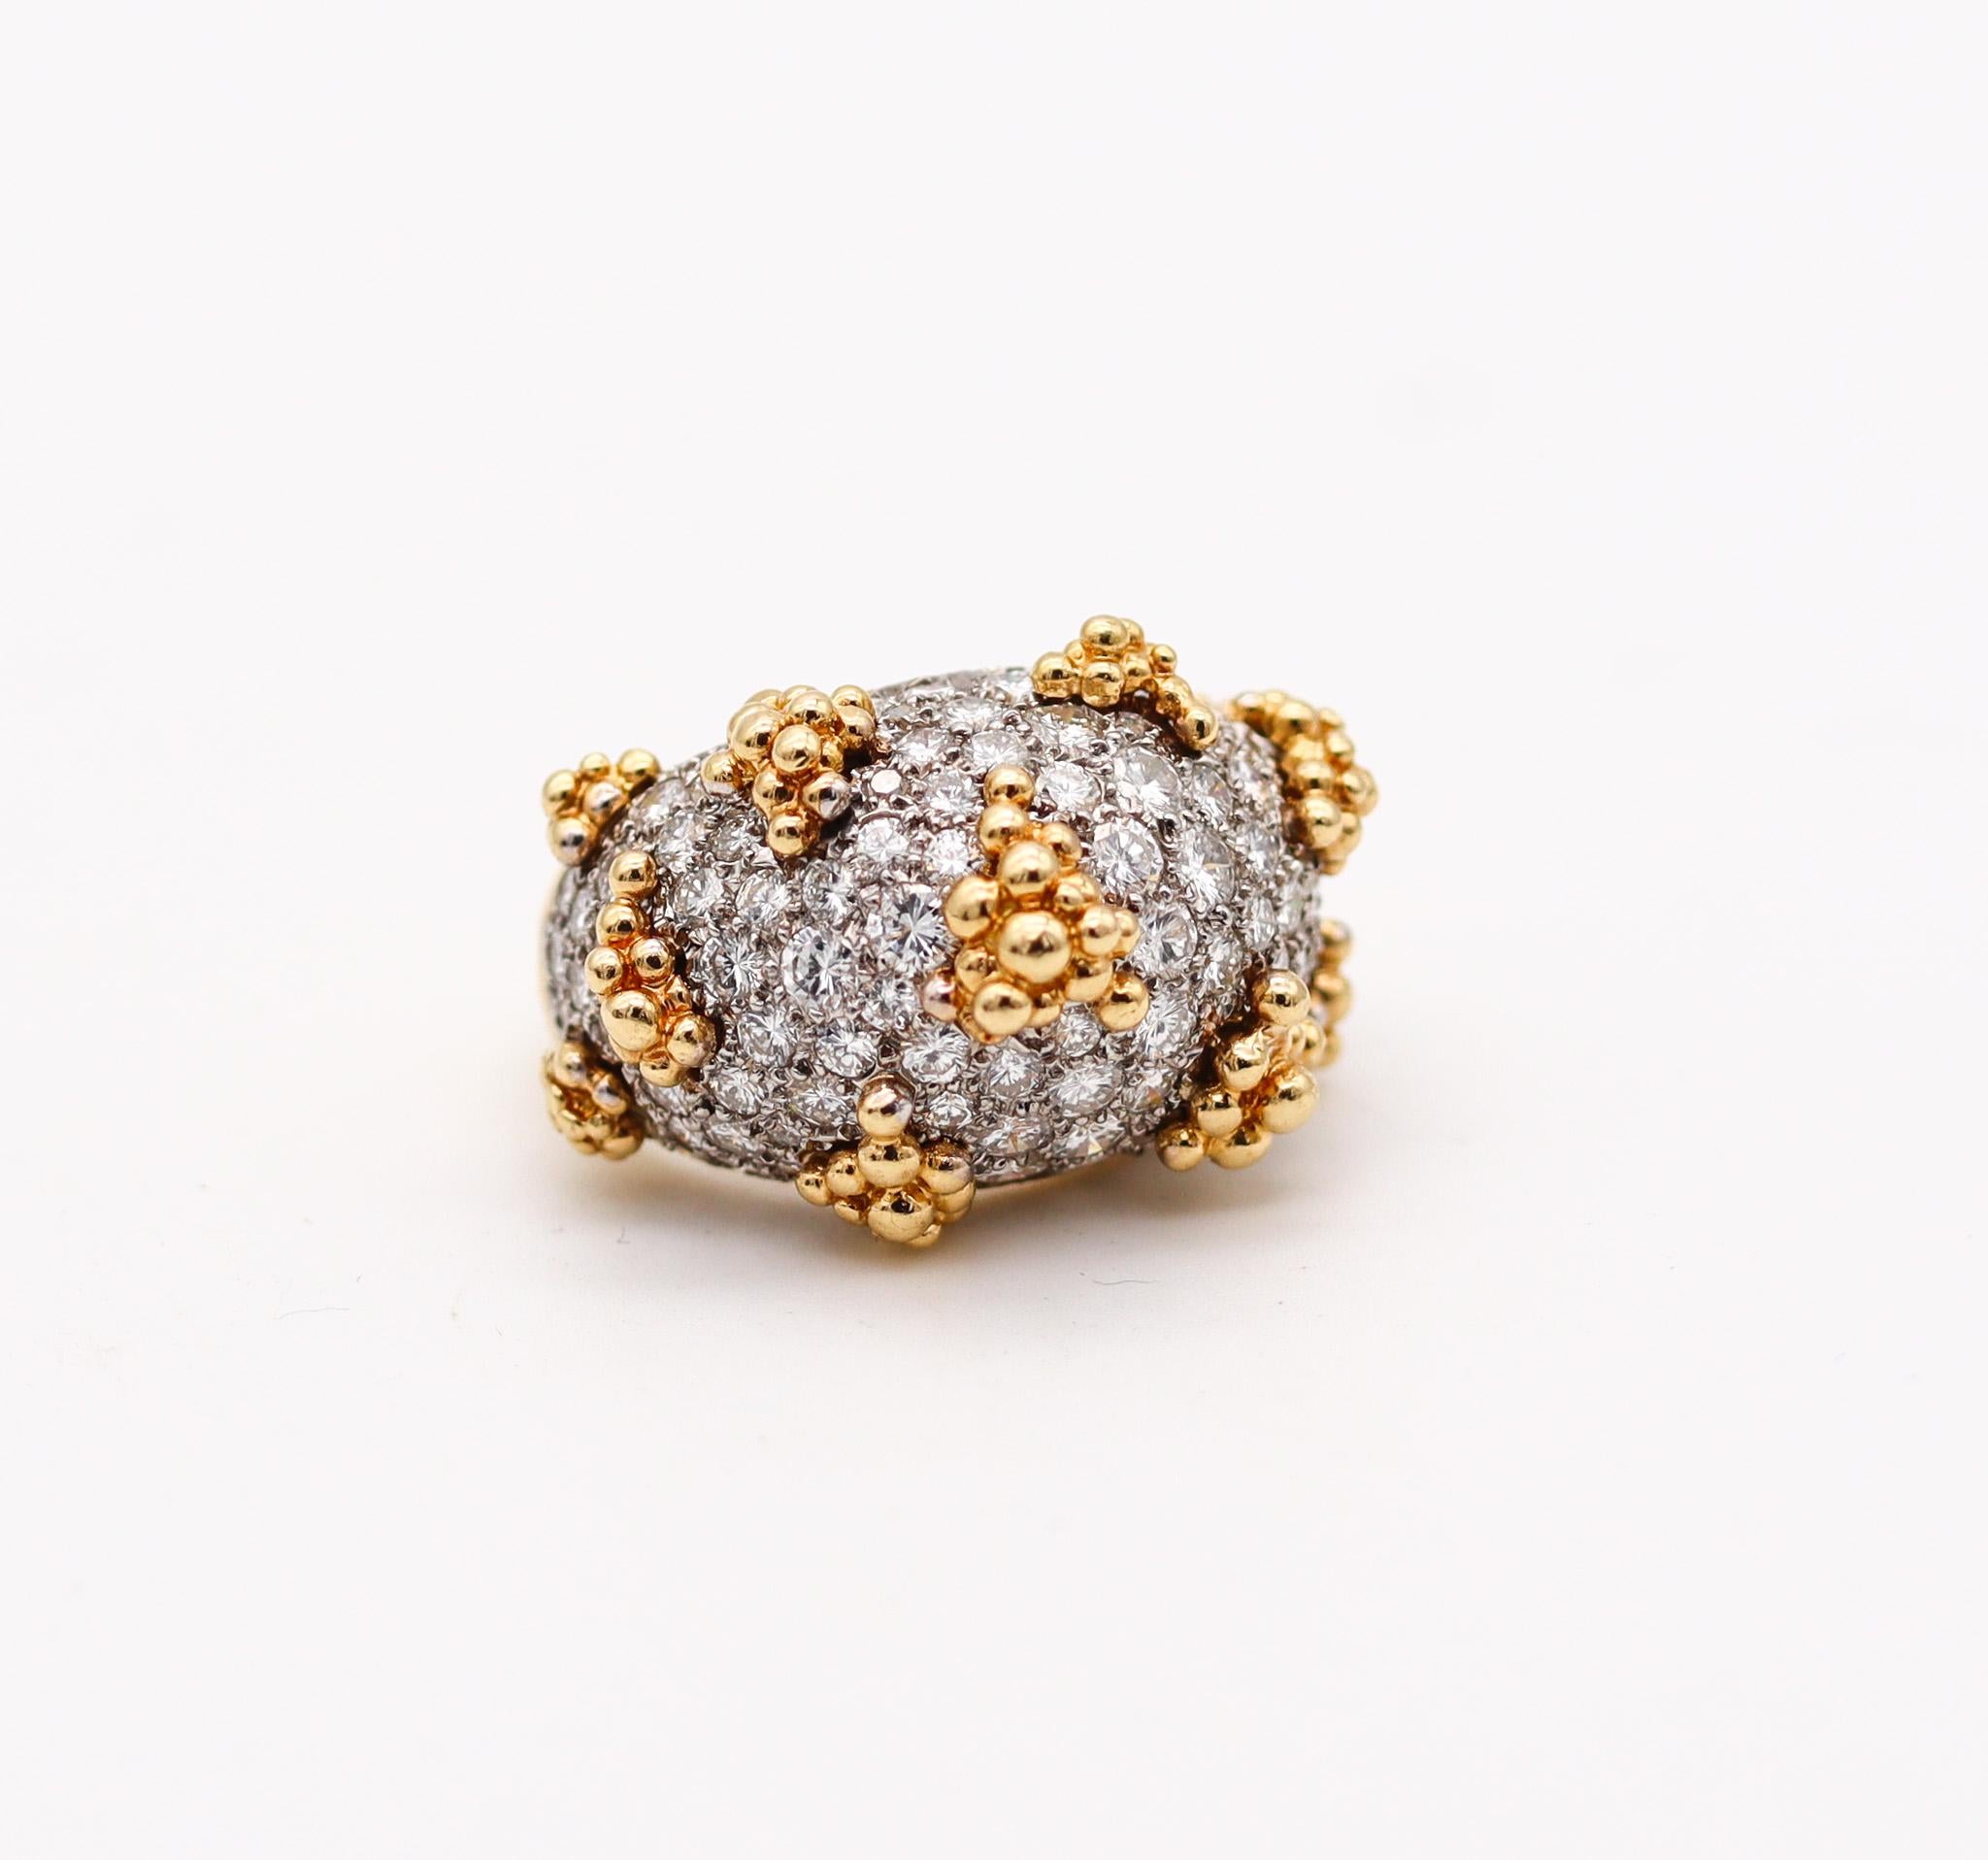 Cocktail ring with a pave of diamonds

Gorgeous cocktail ring, created during the mid-century period, circa late 1960's. This fabulous ring has been crafted with a bombe shape in solid yellow gold of 18 karats with high polished finish and a gallery